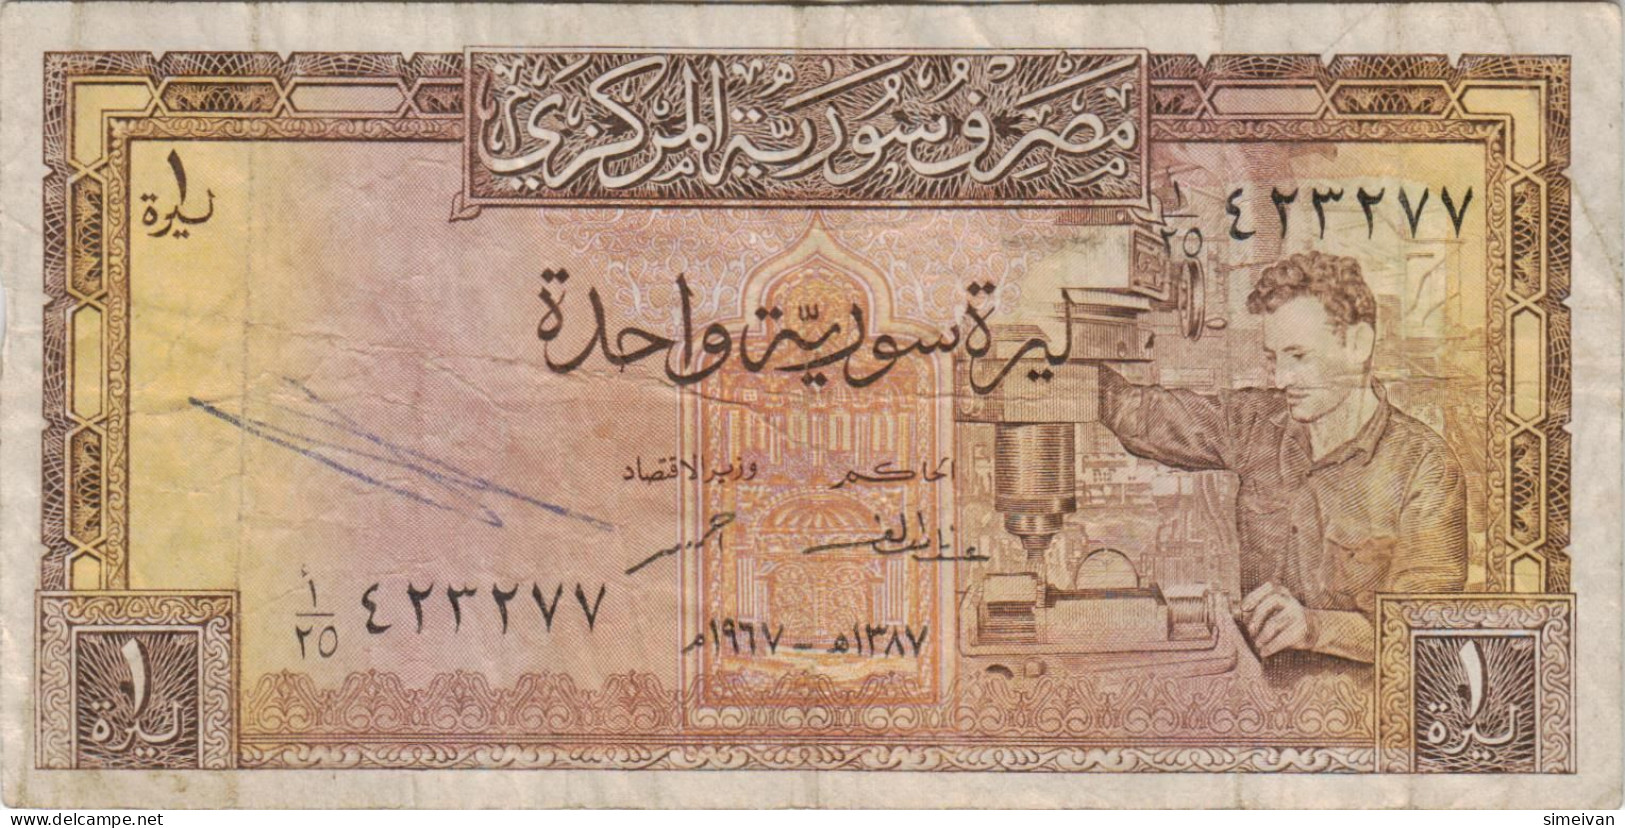 Syria 1 Pound 1967 P-93b Banknote Middle East Currency Syrie Syrien #5341 - Syrie